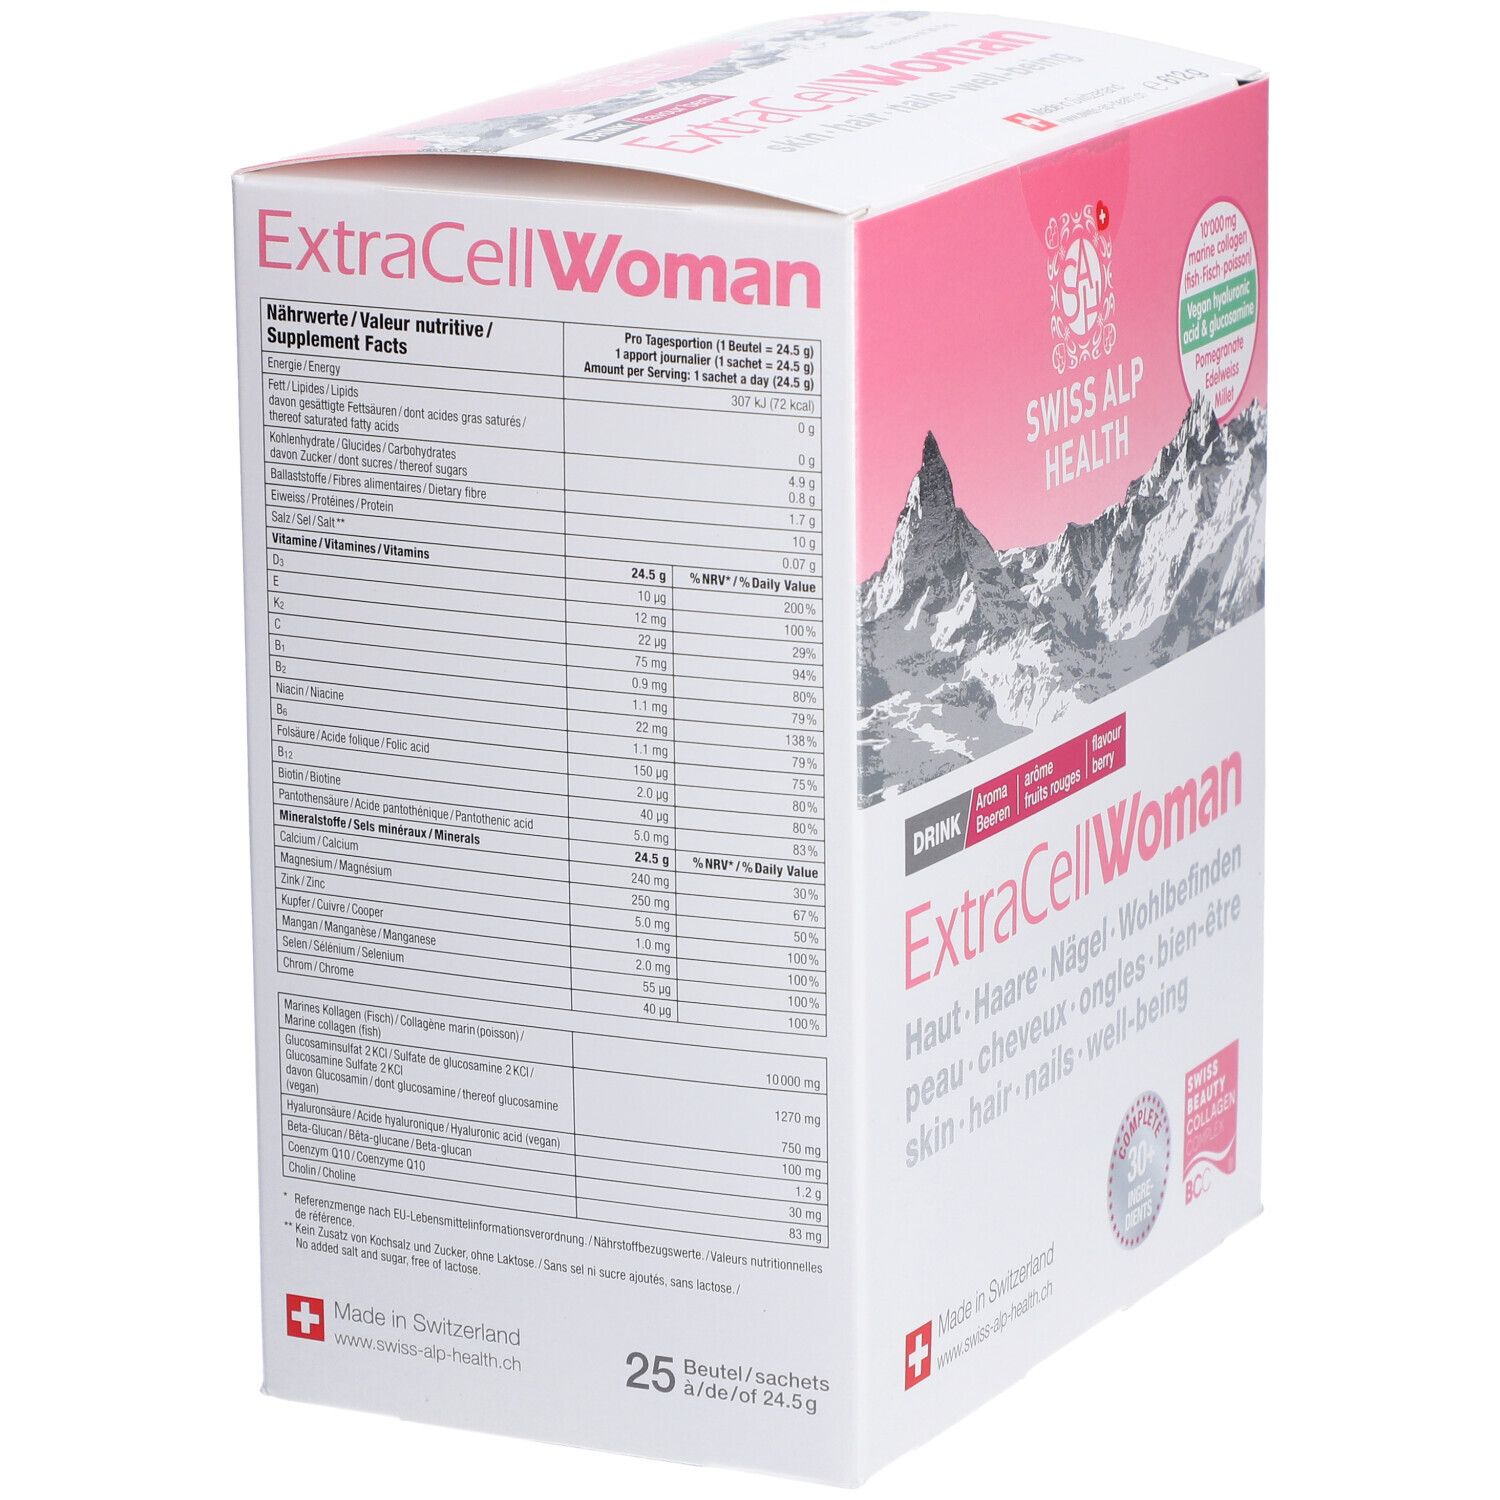 EXTRA CELL Woman Drink beauty&wellness